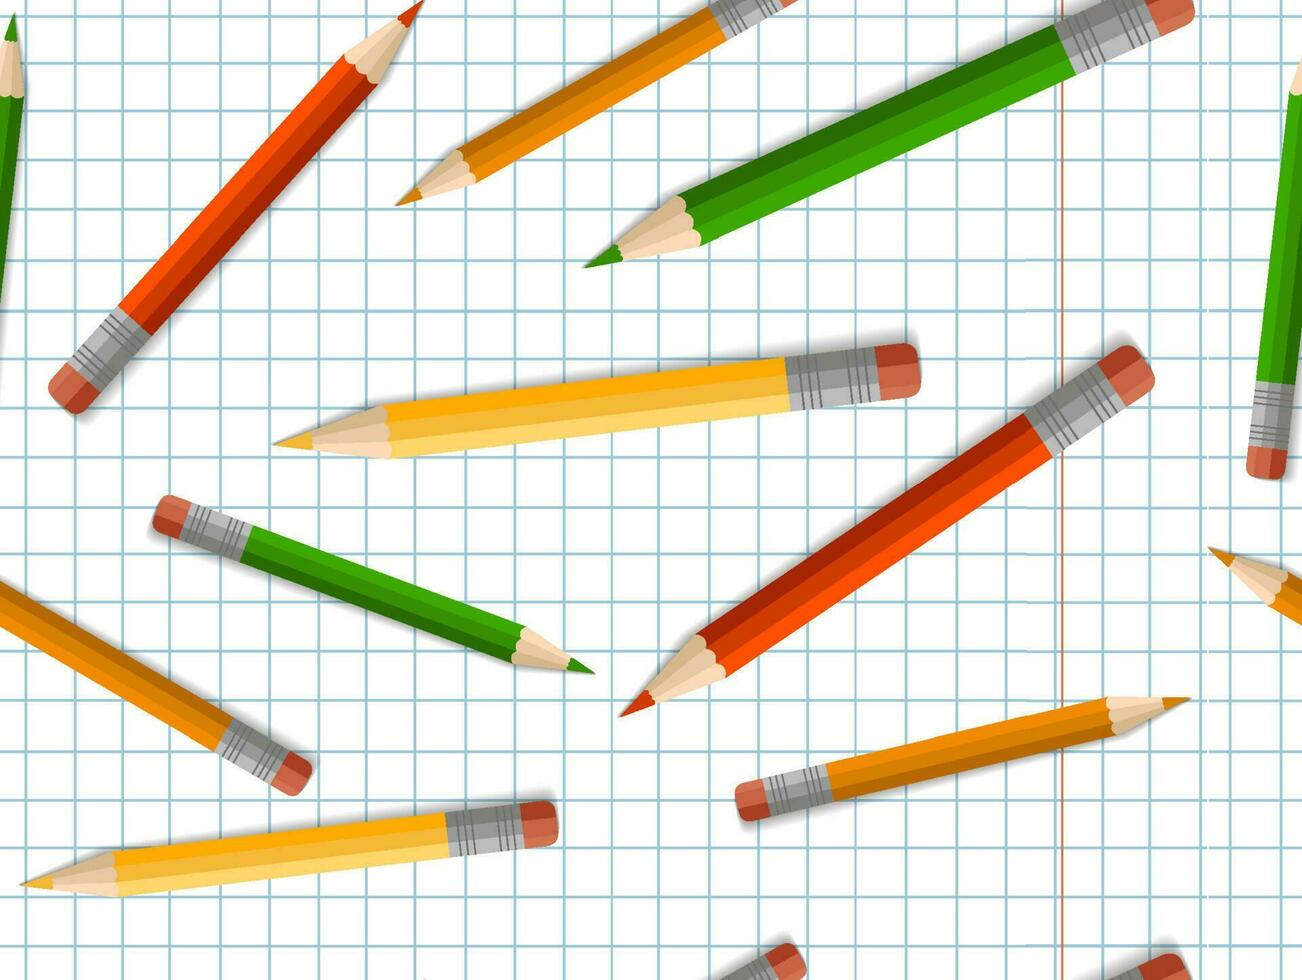 Colored pencils with an eraser, school supplies, stationery, a checkered notebook. The concept of schooling, back to school, first time to school. Seamless pattern vector